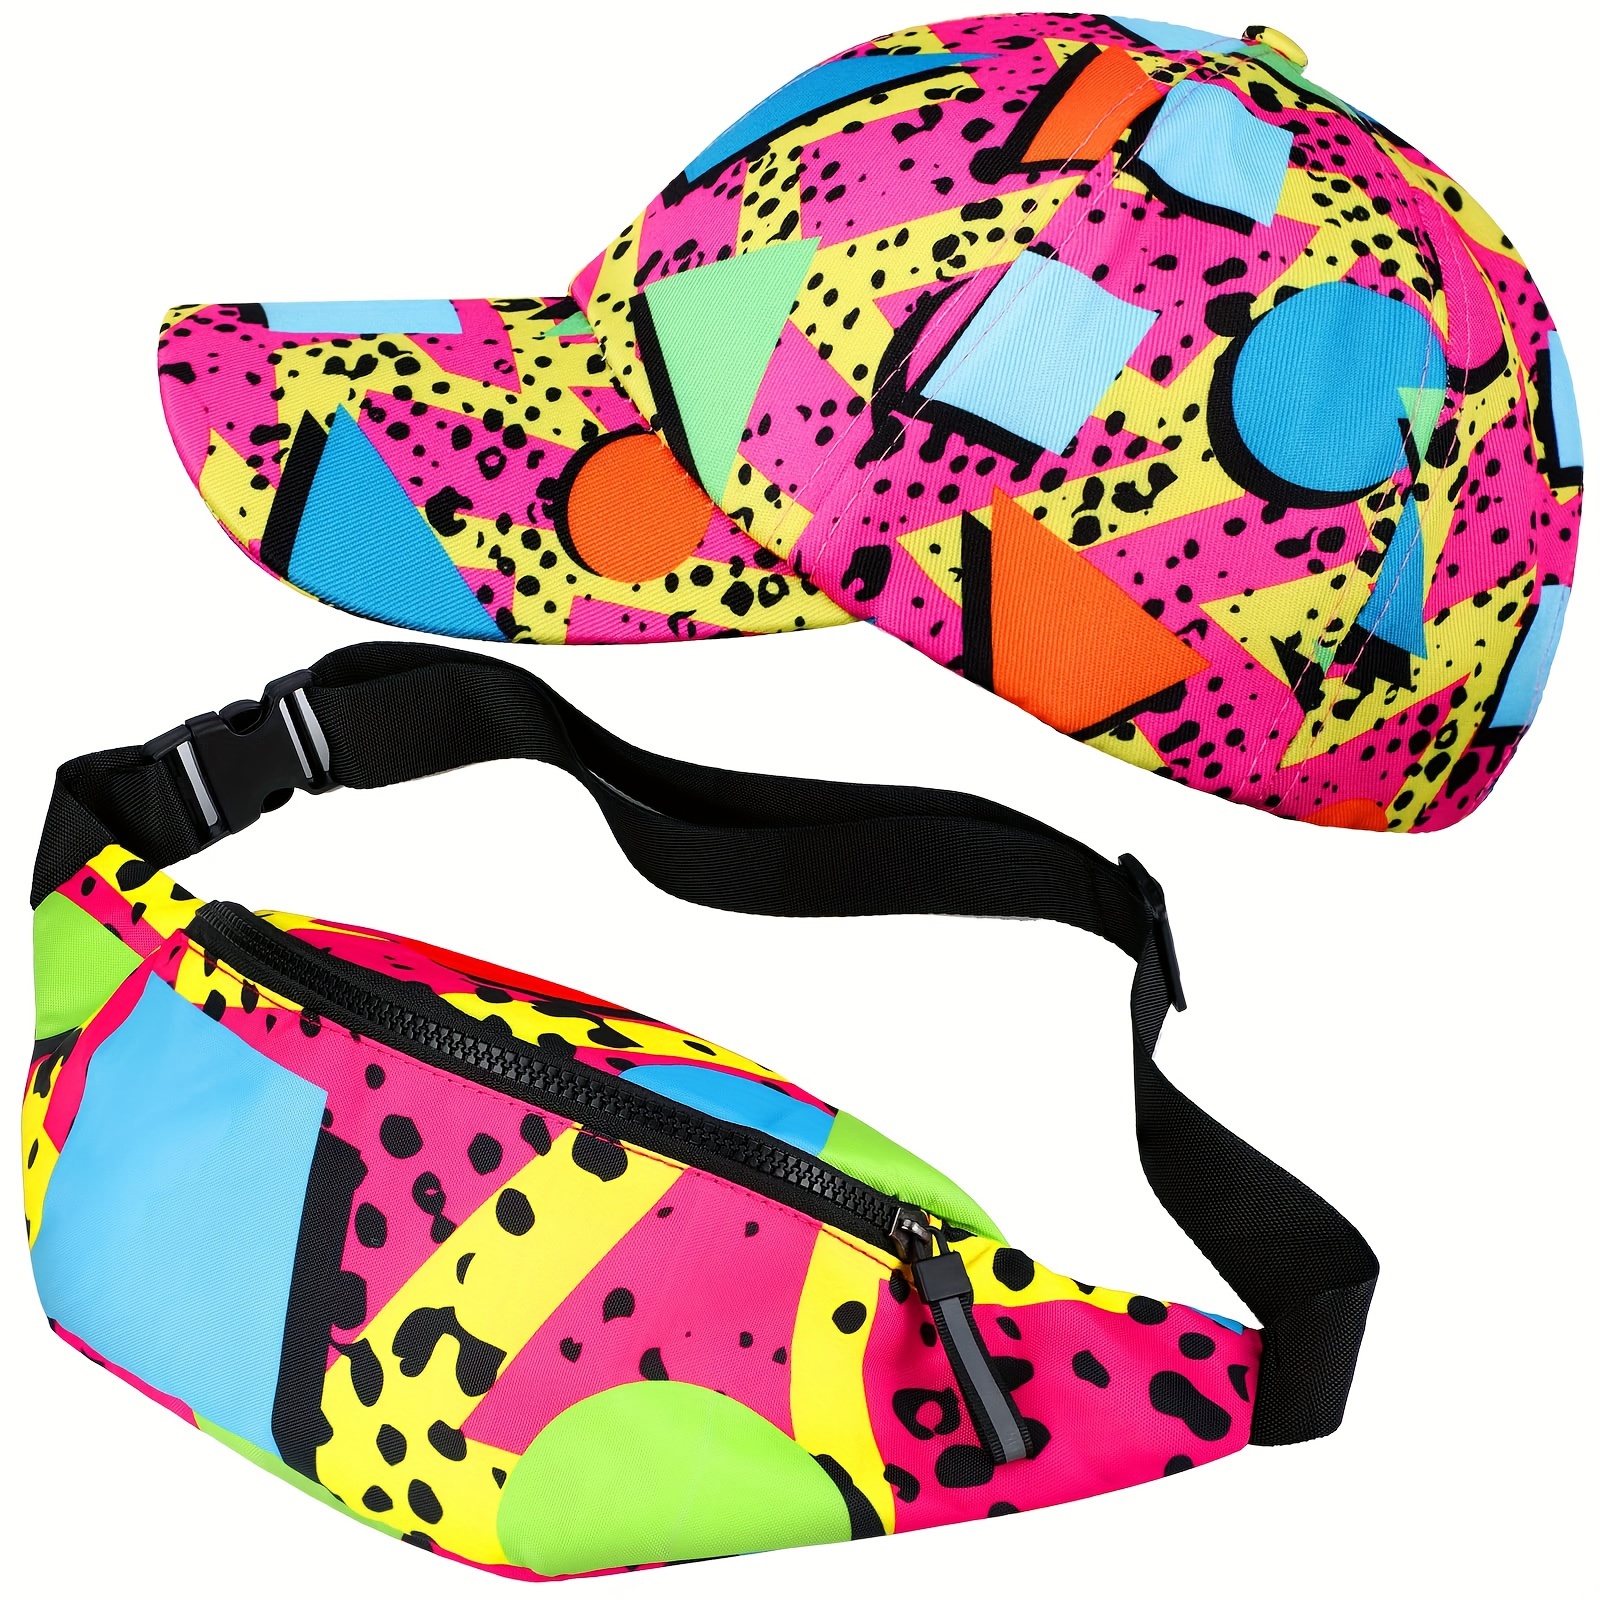 

2pcs 80s 90s Fanny Packs & Cap Set For Women And Men - Retro Accessories For Back In The Day Parties, Raves